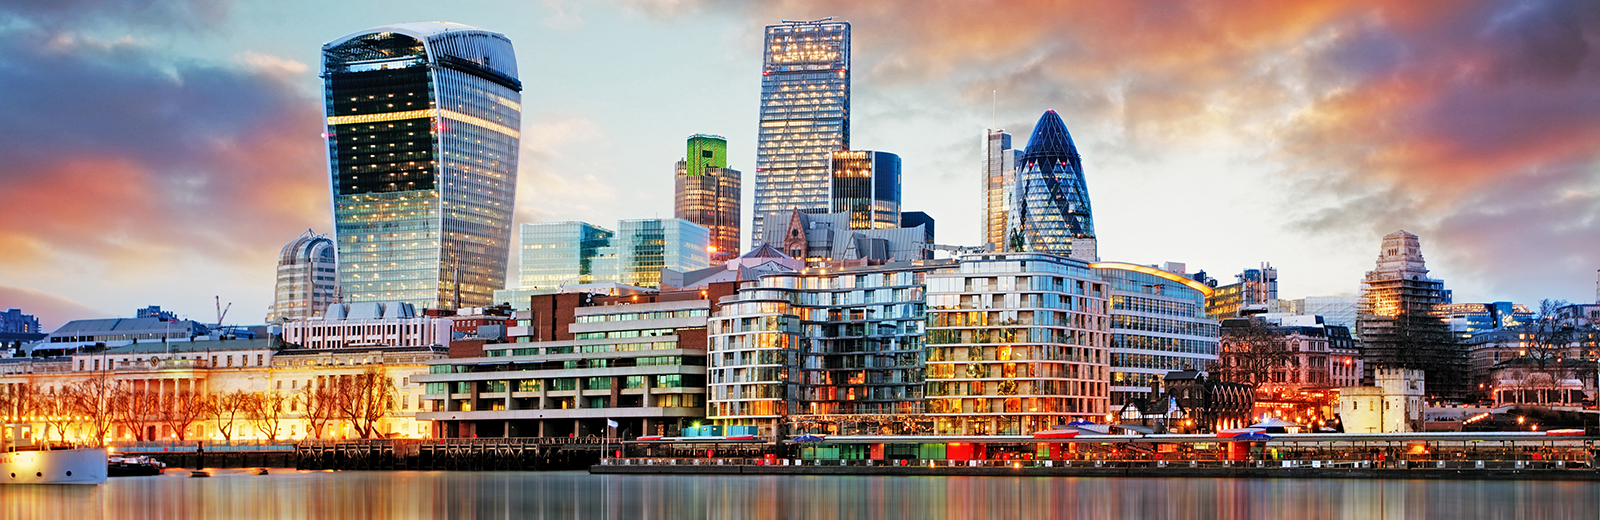 View of London's financial district from the Thames